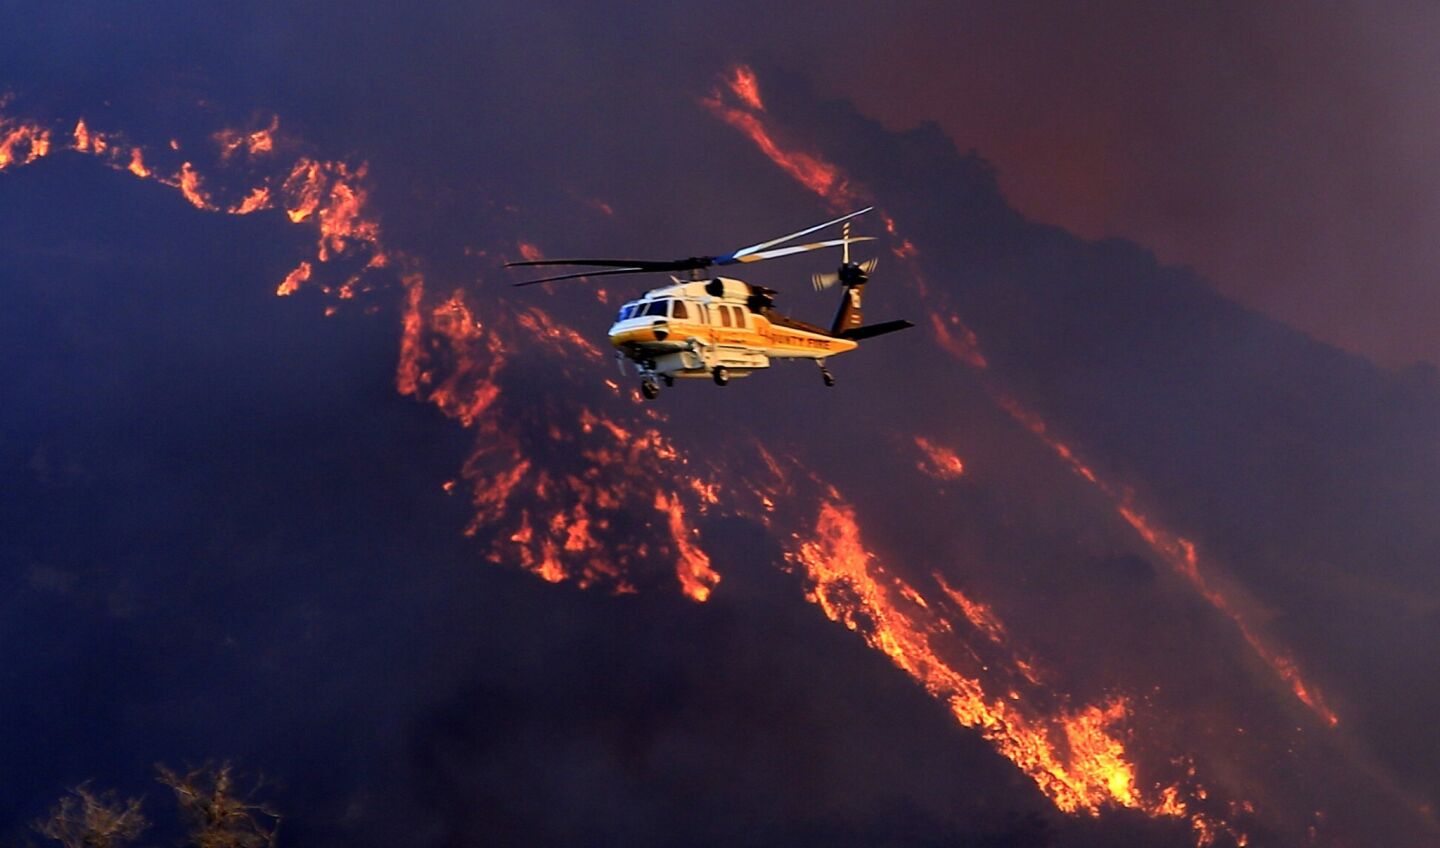 A water-dropping helicopter flies over the Colby fire burning in the Angeles National Forest.